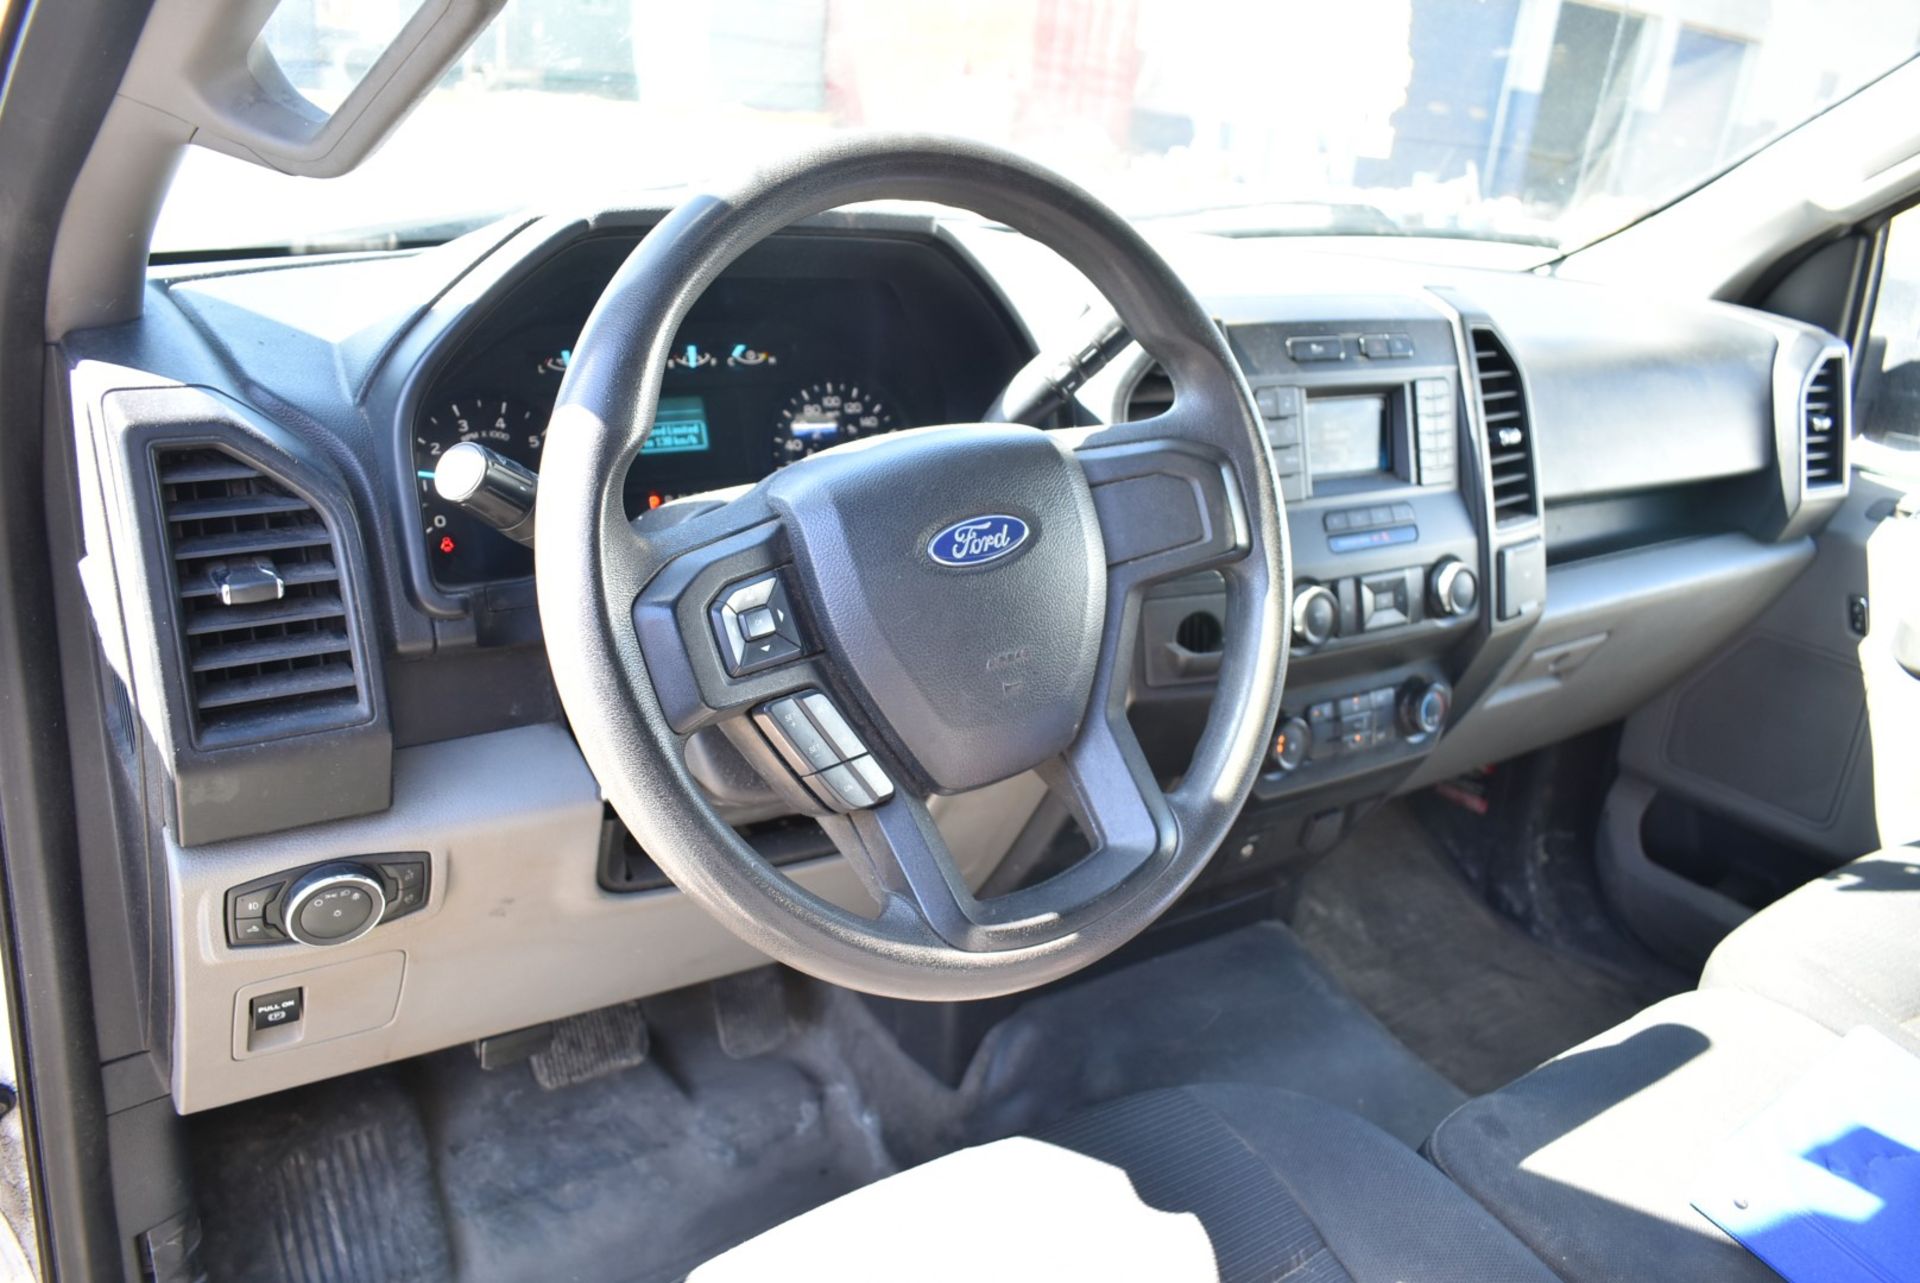 FORD (2019) F150 XL PICKUP TRUCK WITH 5.0L 8 CYL. GAS ENGINE, AUTO. TRANSMISSION, RWD, BED CAP, 97, - Image 11 of 13